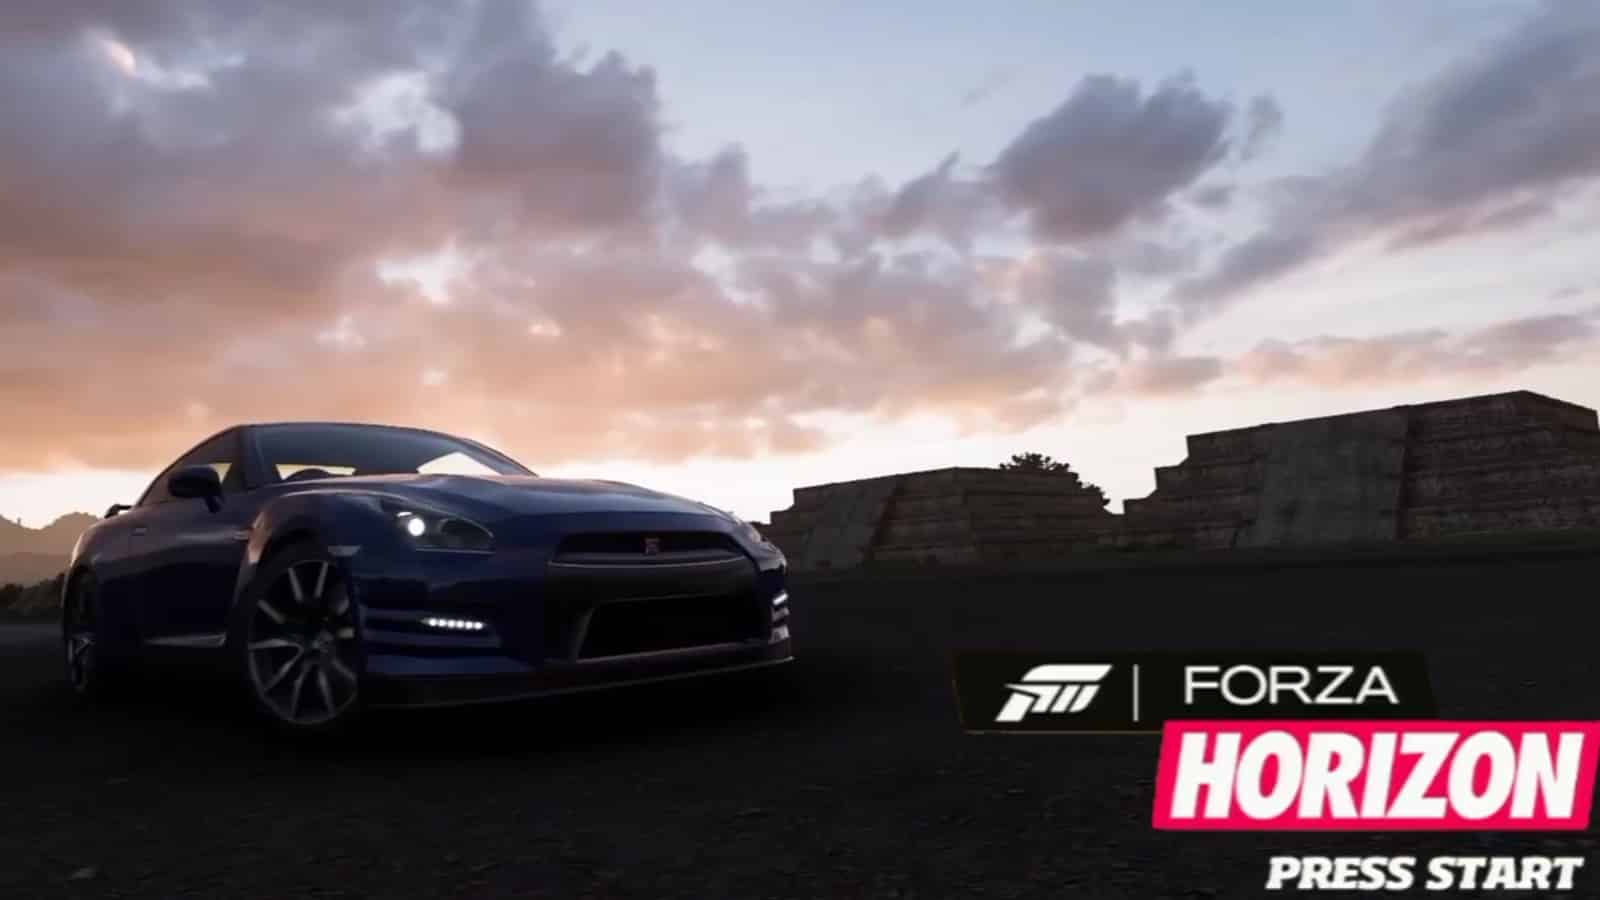 Forza Horizon 5 system requirements : r/forza